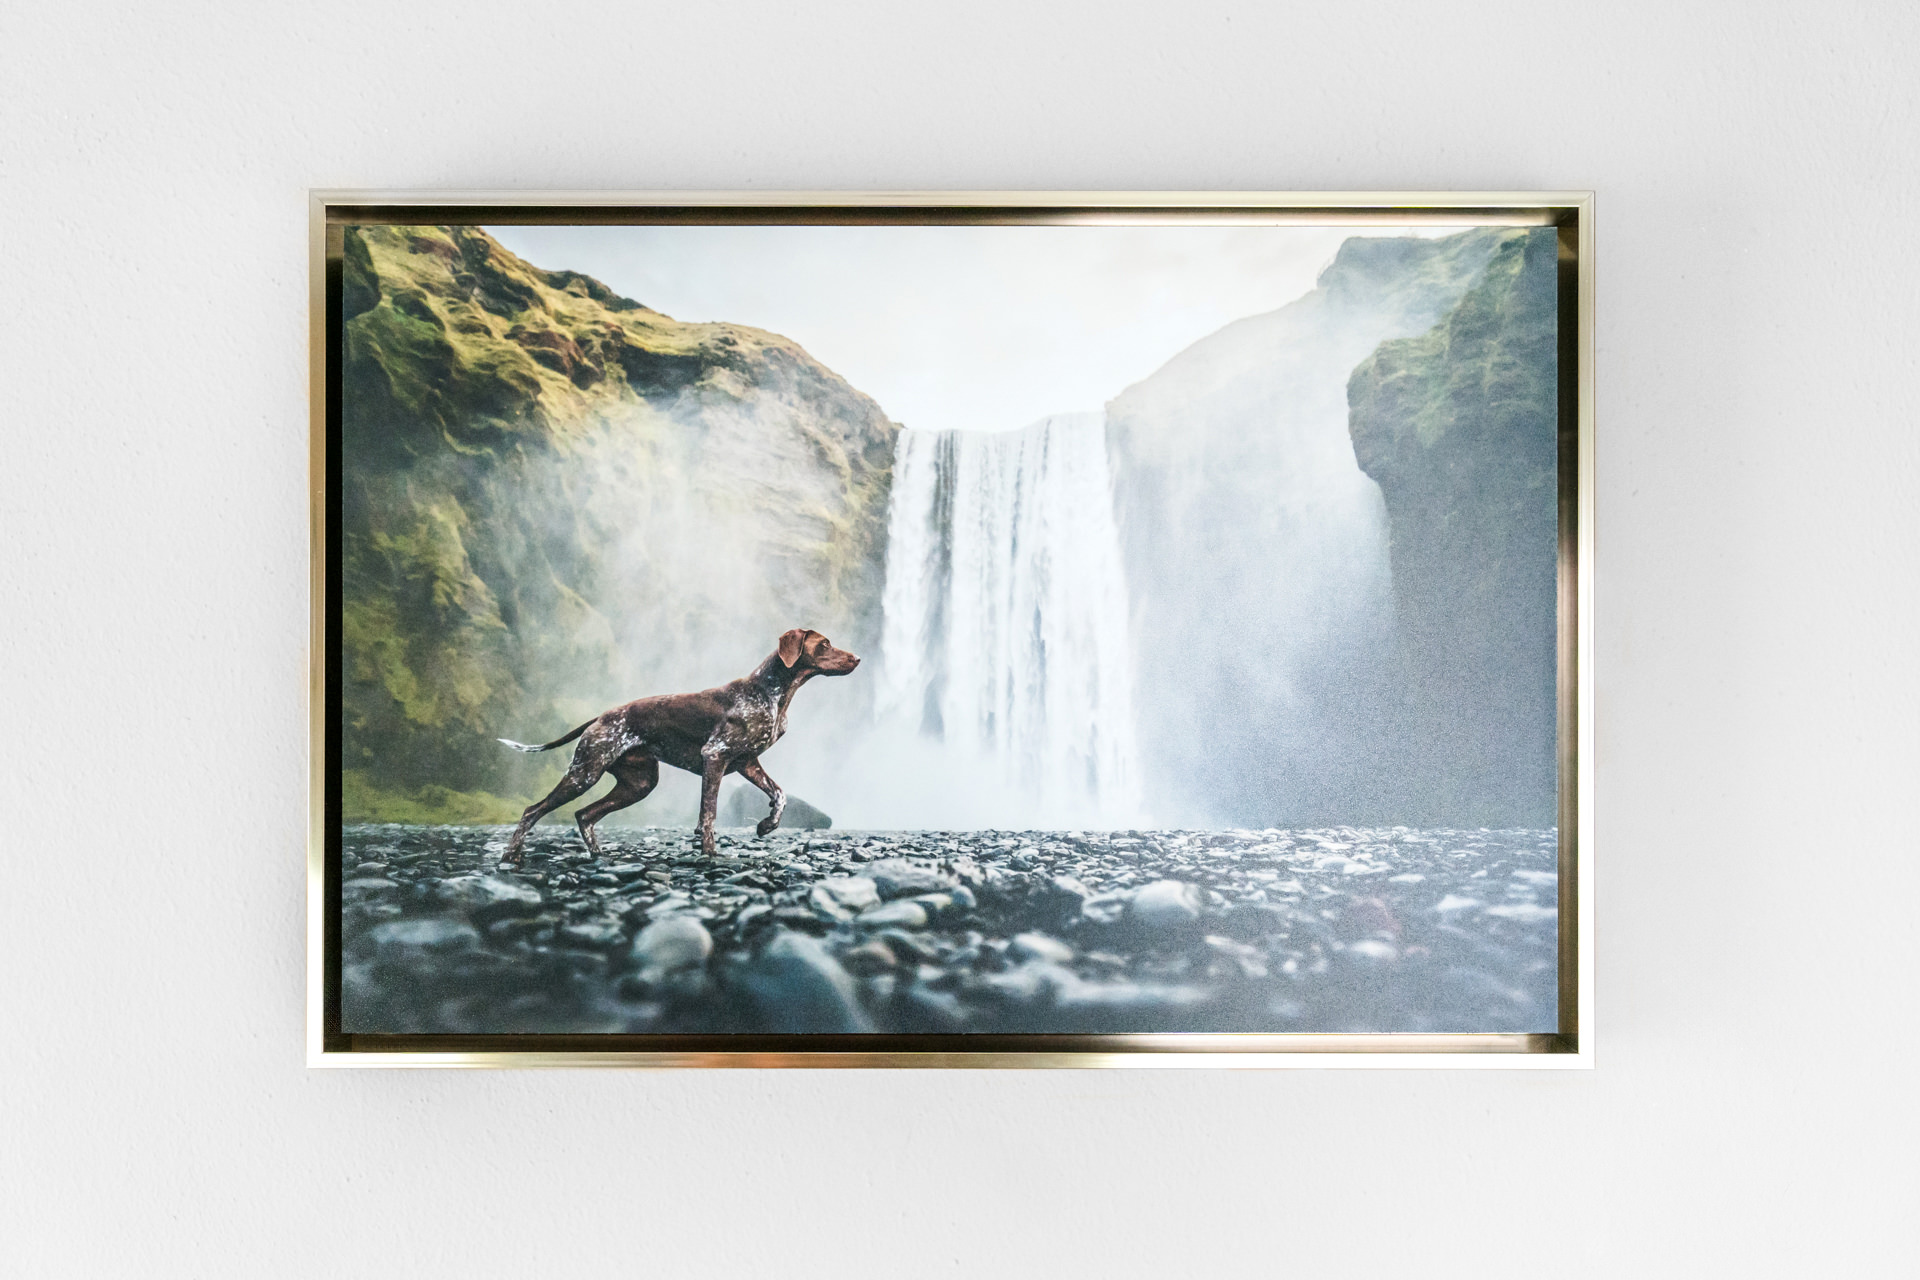 Framed photo of dog in front of waterfall on wall.